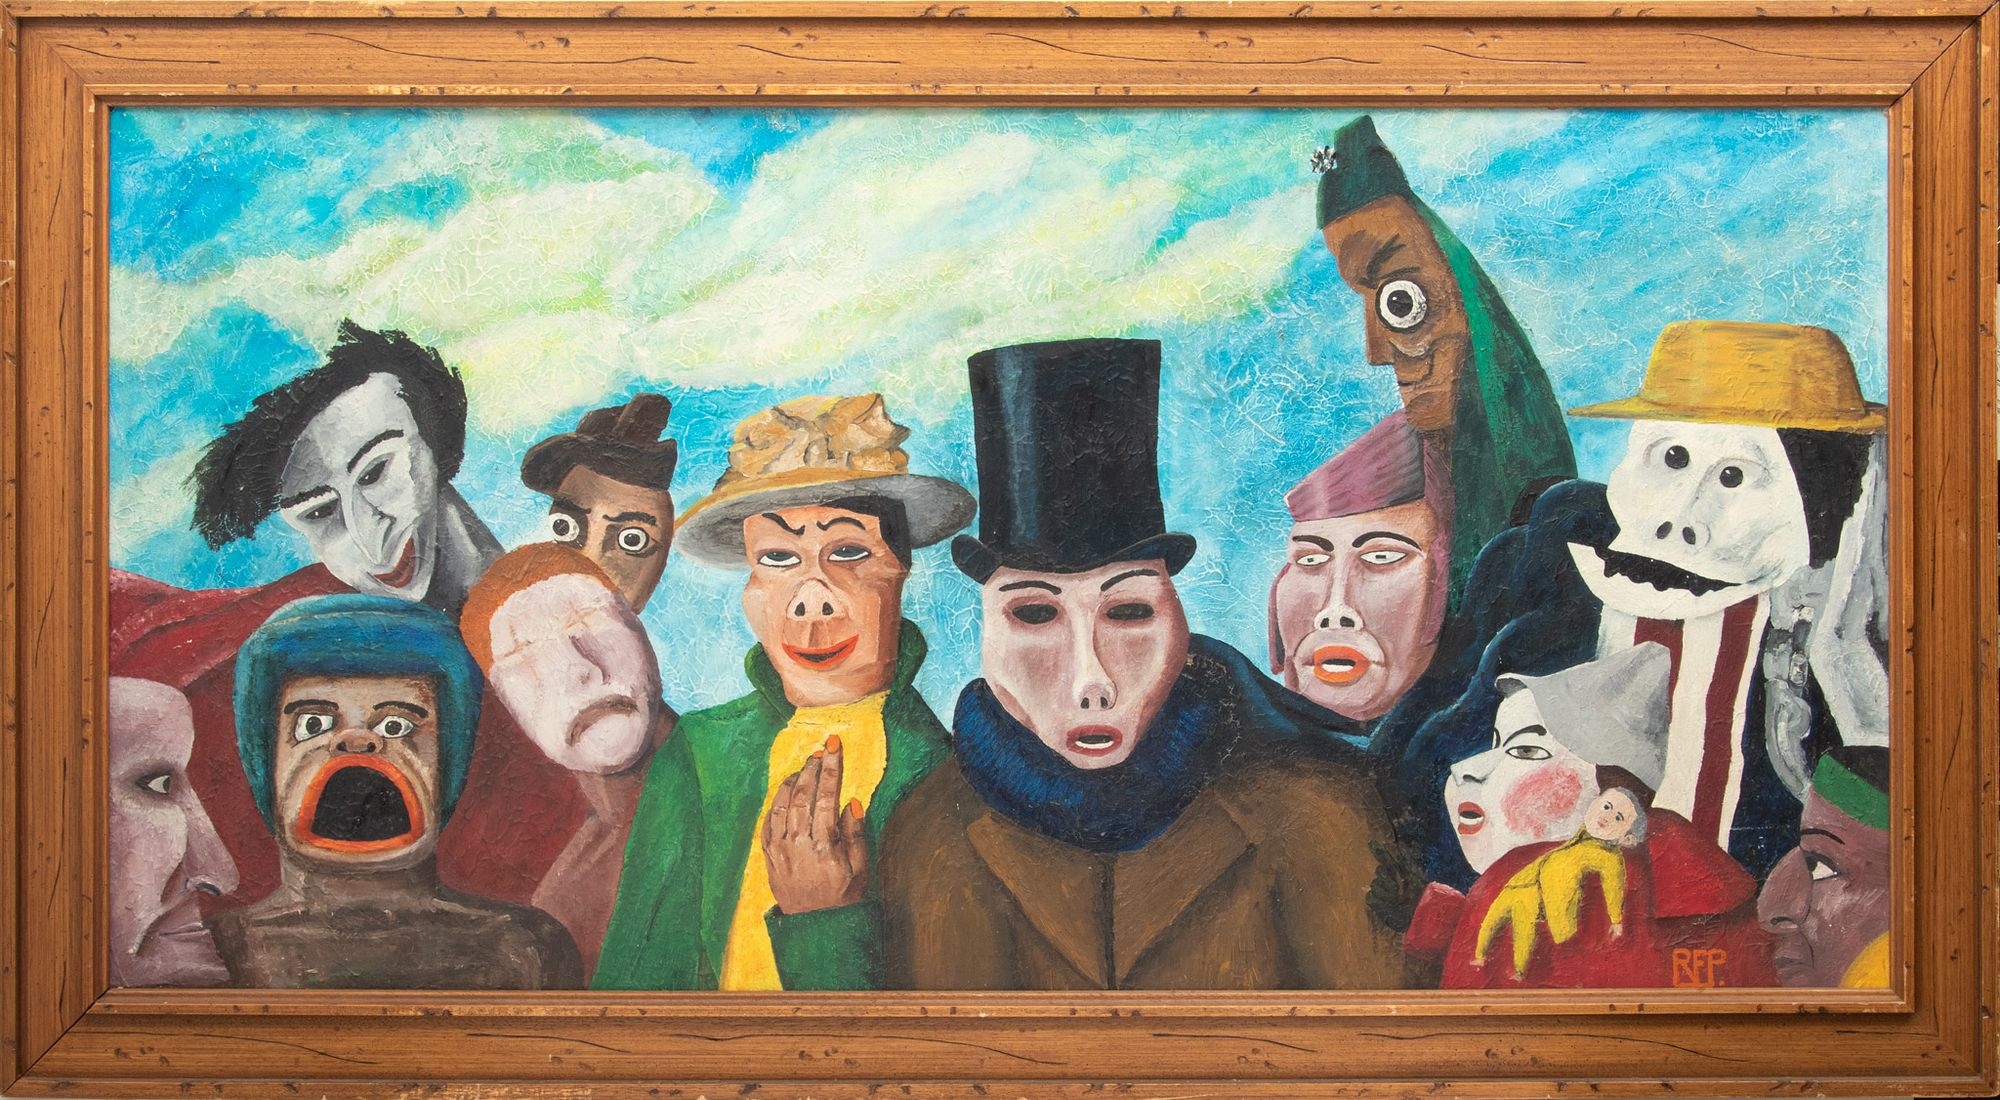 Artwork by James Ensor, The Intrigue, Made of Oil on Masonite